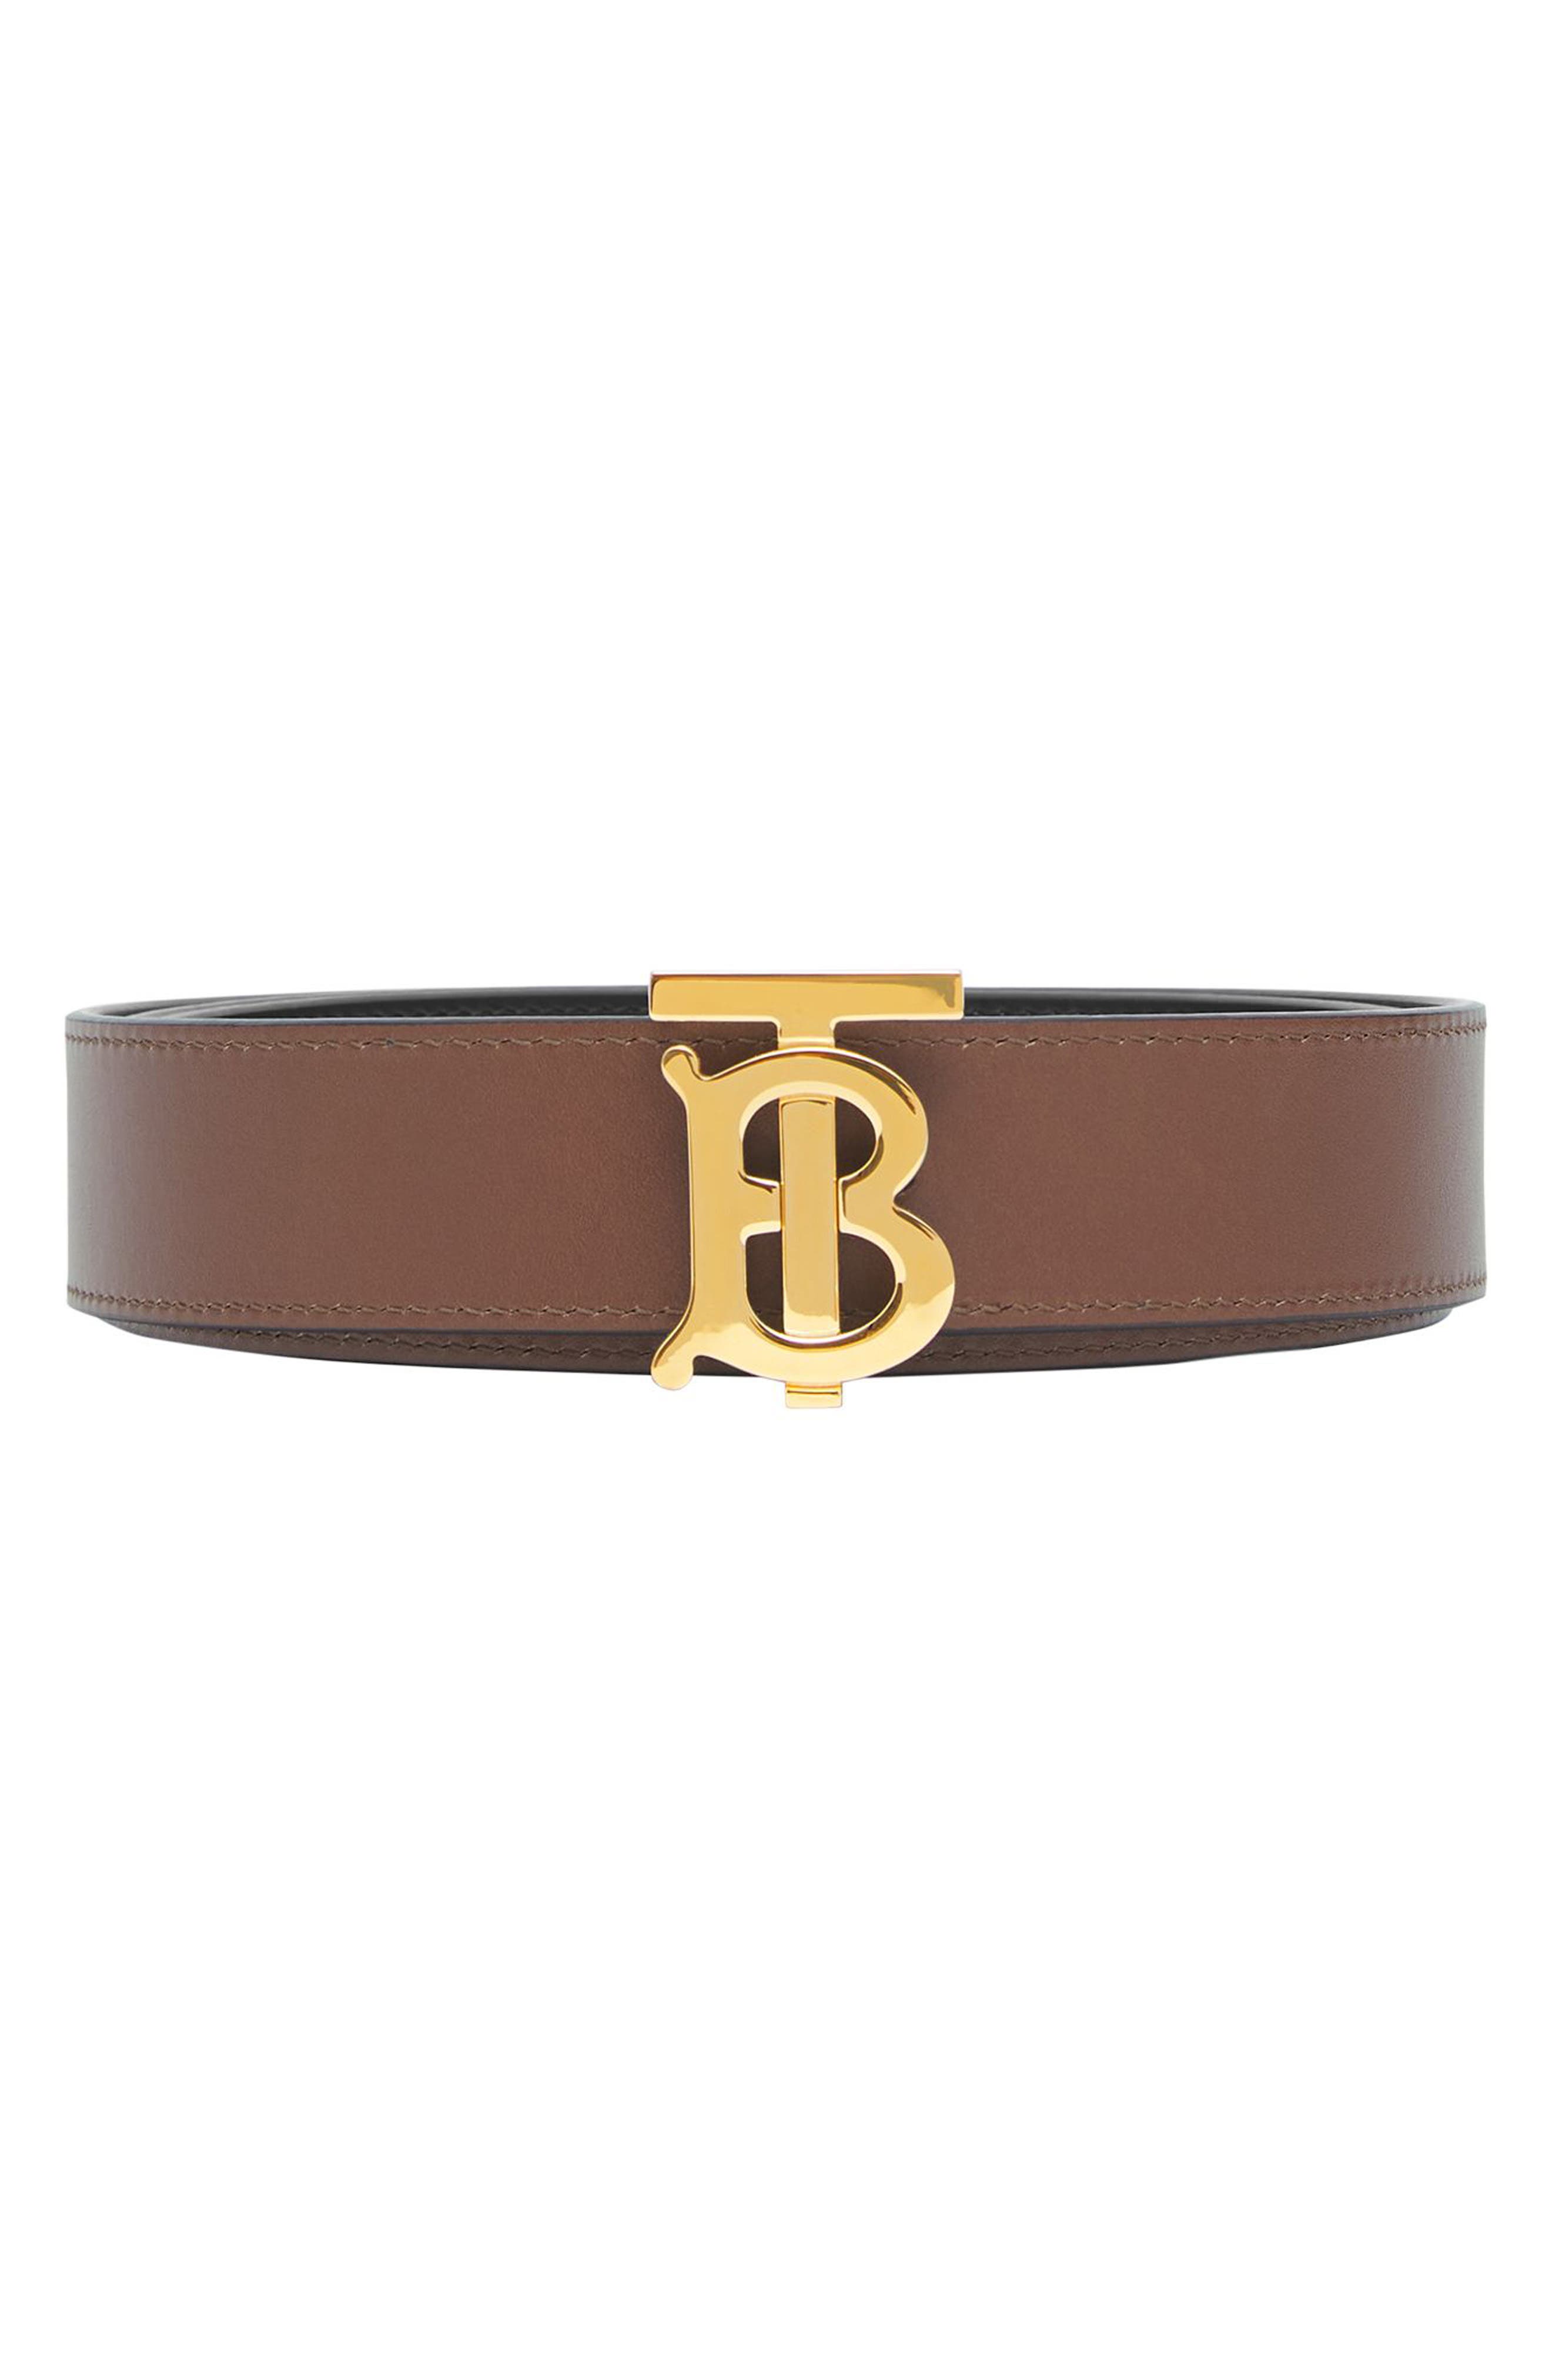 BURBERRY TB 30 Reversible Leather Belt in Black /Tan /Gold